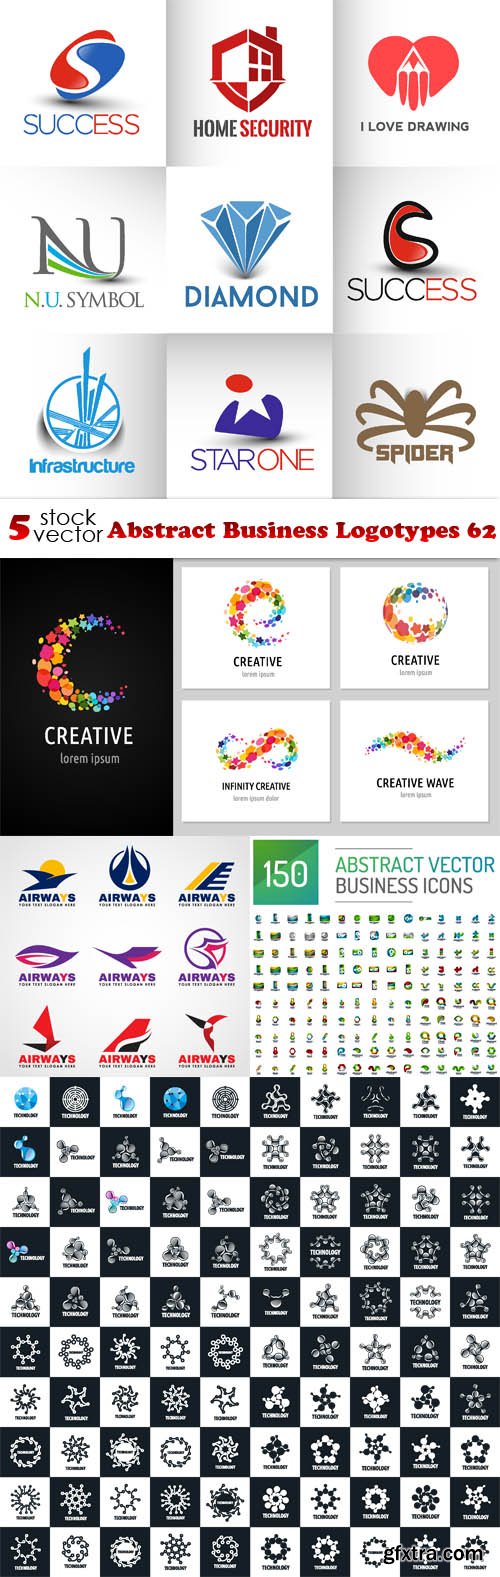 Vectors - Abstract Business Logotypes 62